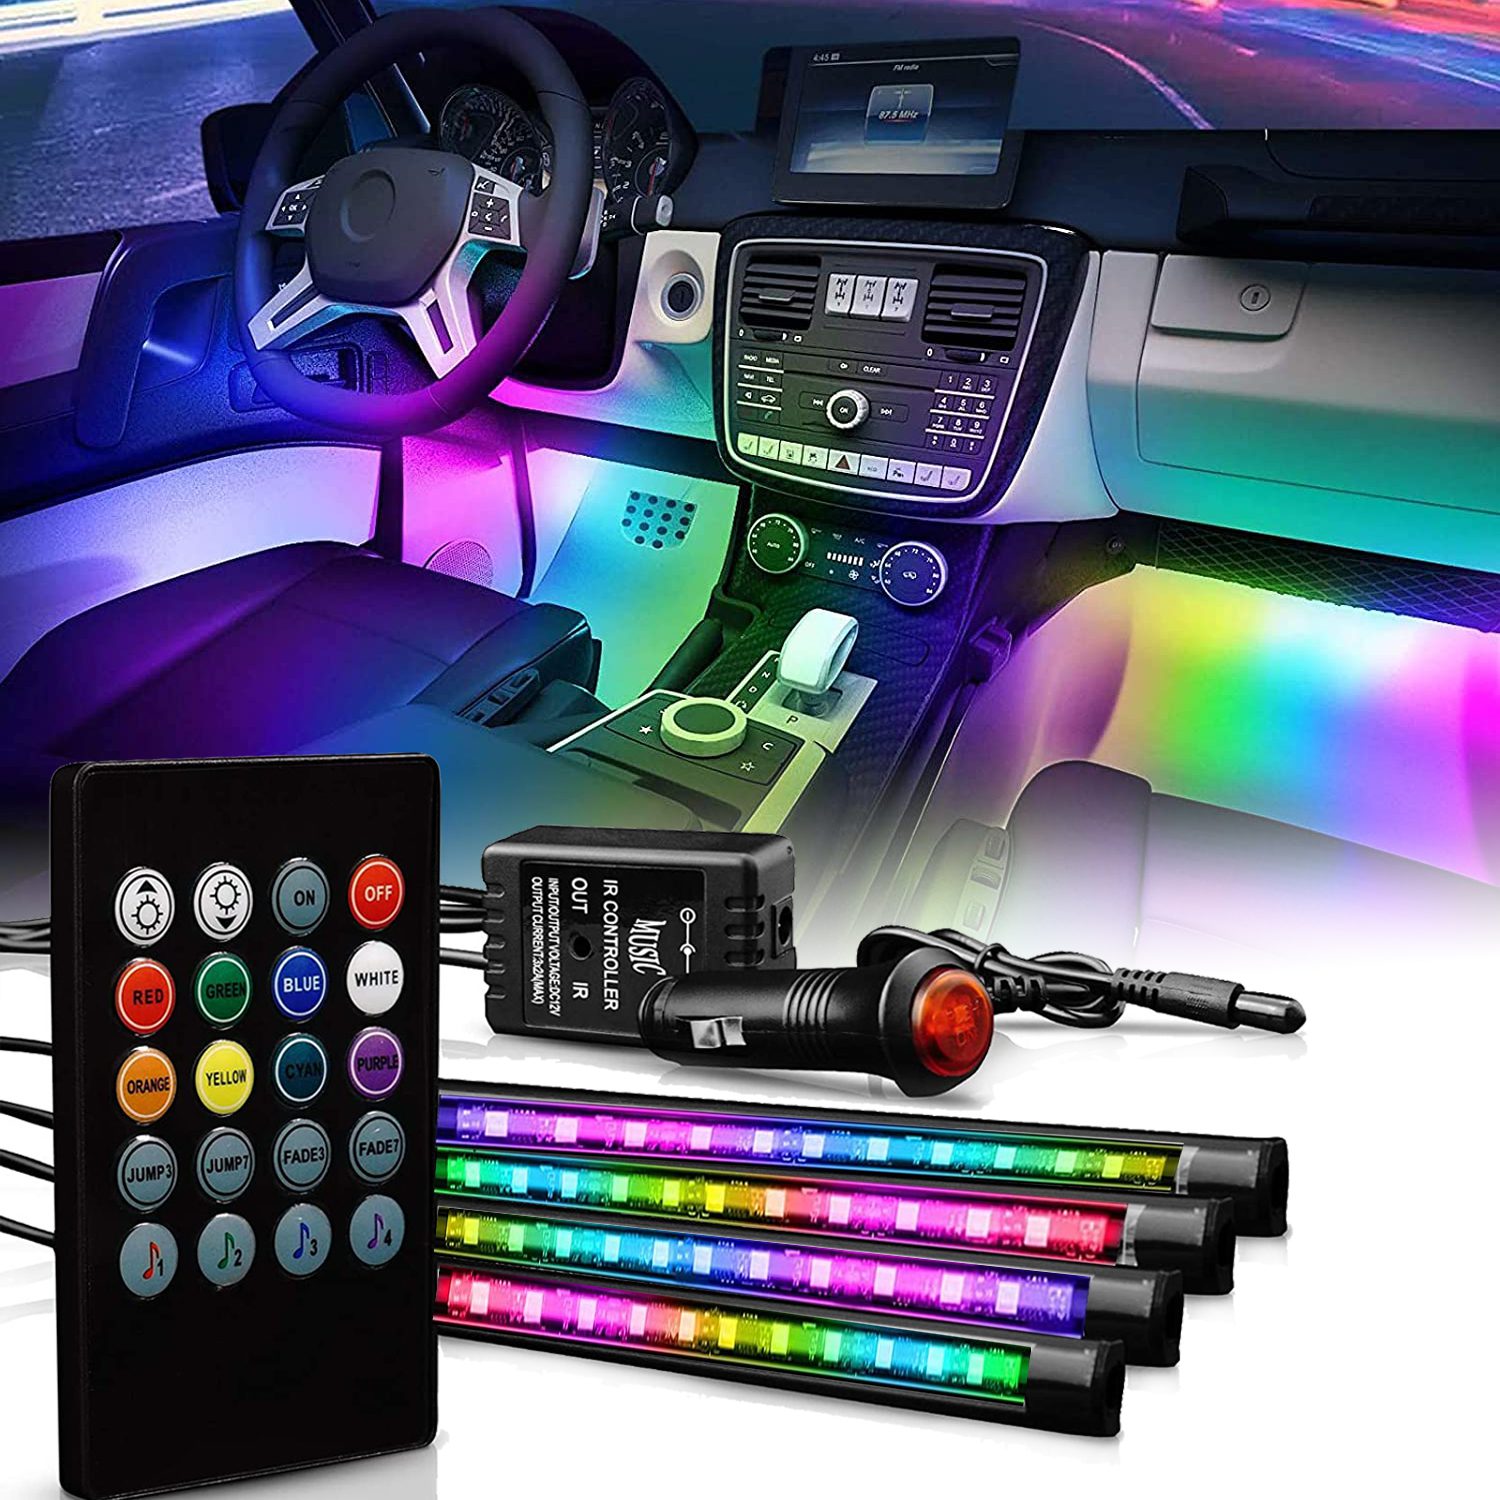 Wireless Remote Control,Car Mood Lights for Car TV Home Decorate Car LED Strip Light 4pcs 48 LED DC 12V Multicolor Music Car Interior Light with Sound Active Function USB Charge 